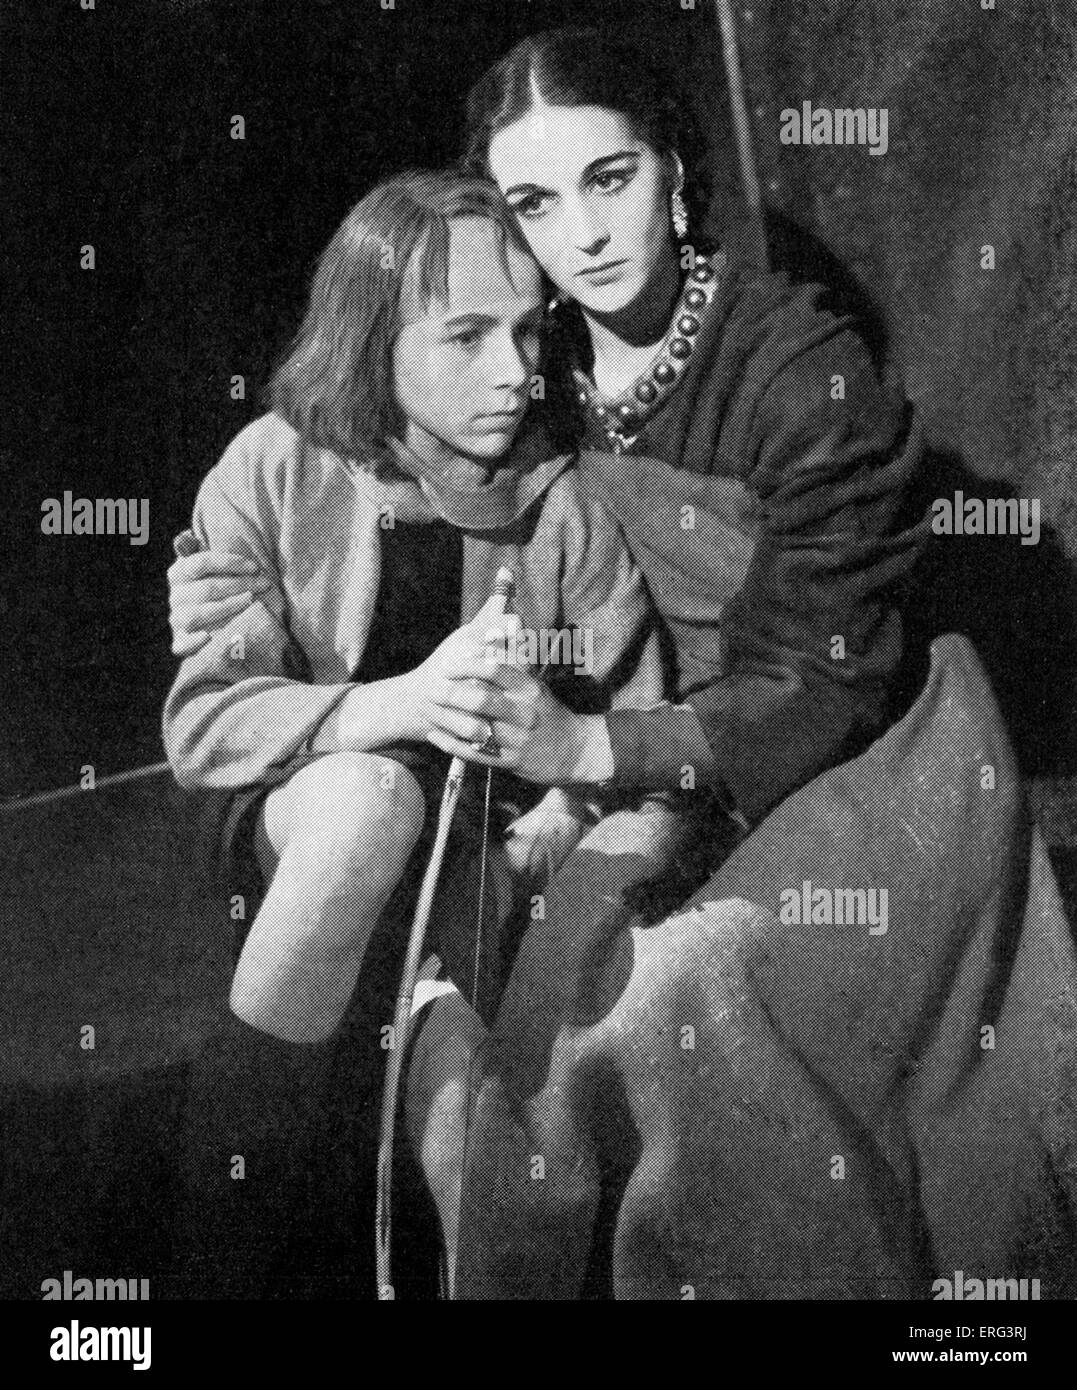 'Macbeth' by William Shakespeare, with Gordon Miller as the young Macduff and Vera Poliakoff as Lady Macduff.  Produced by Stock Photo